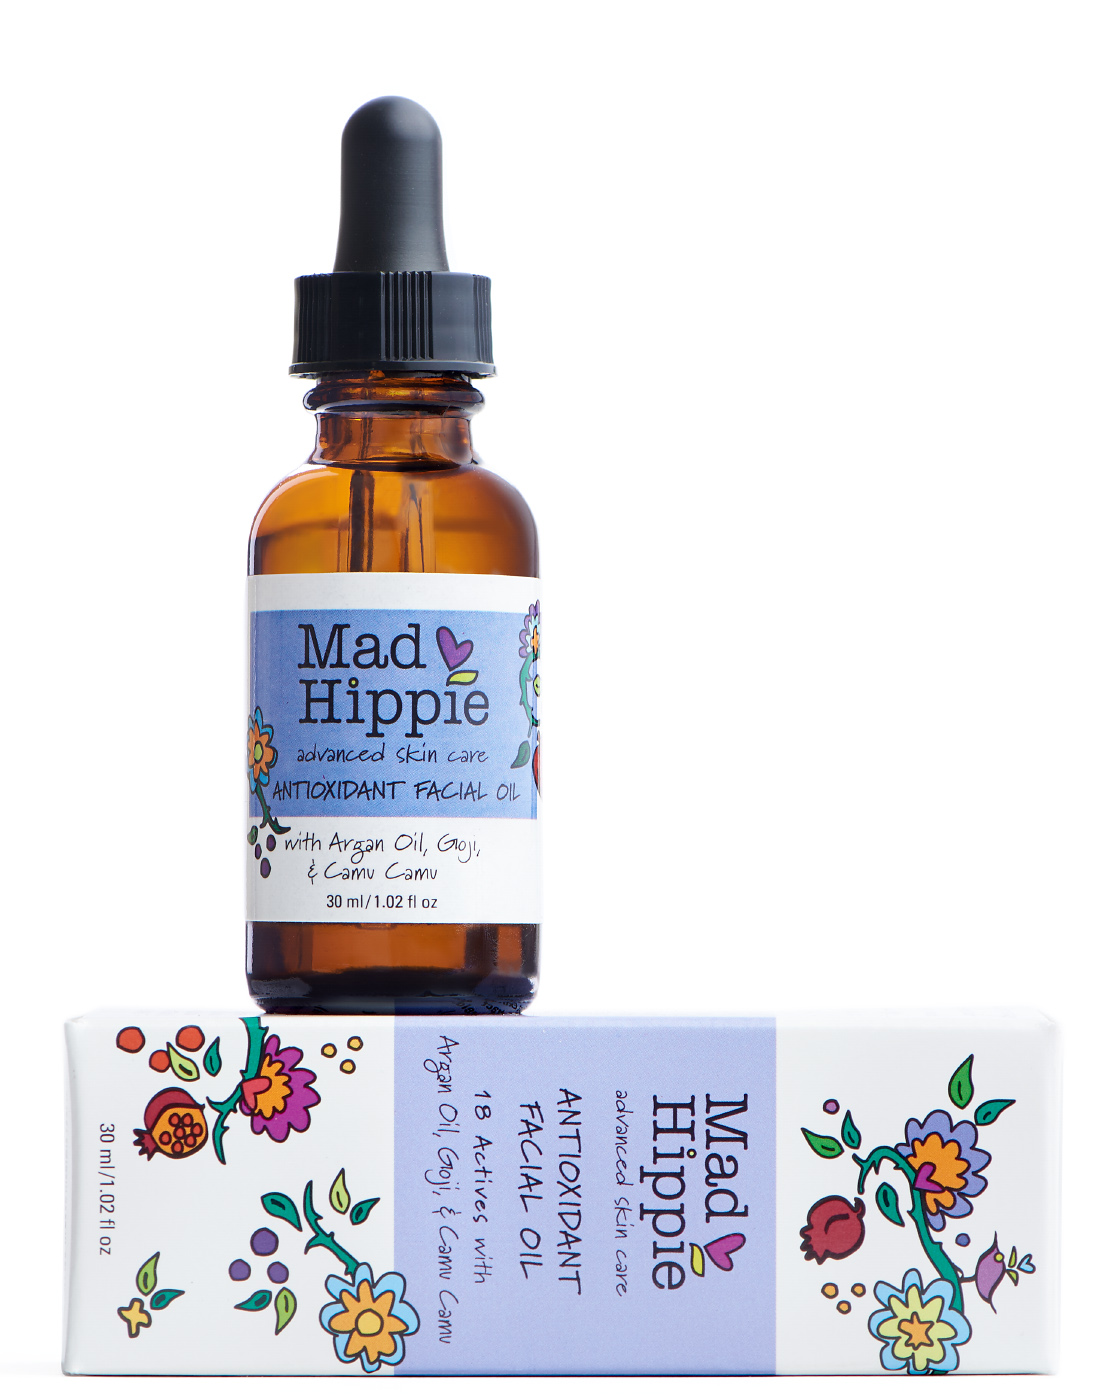 Mad Hippie - Main Product Images - Antioxidant Facial Oil.jpg